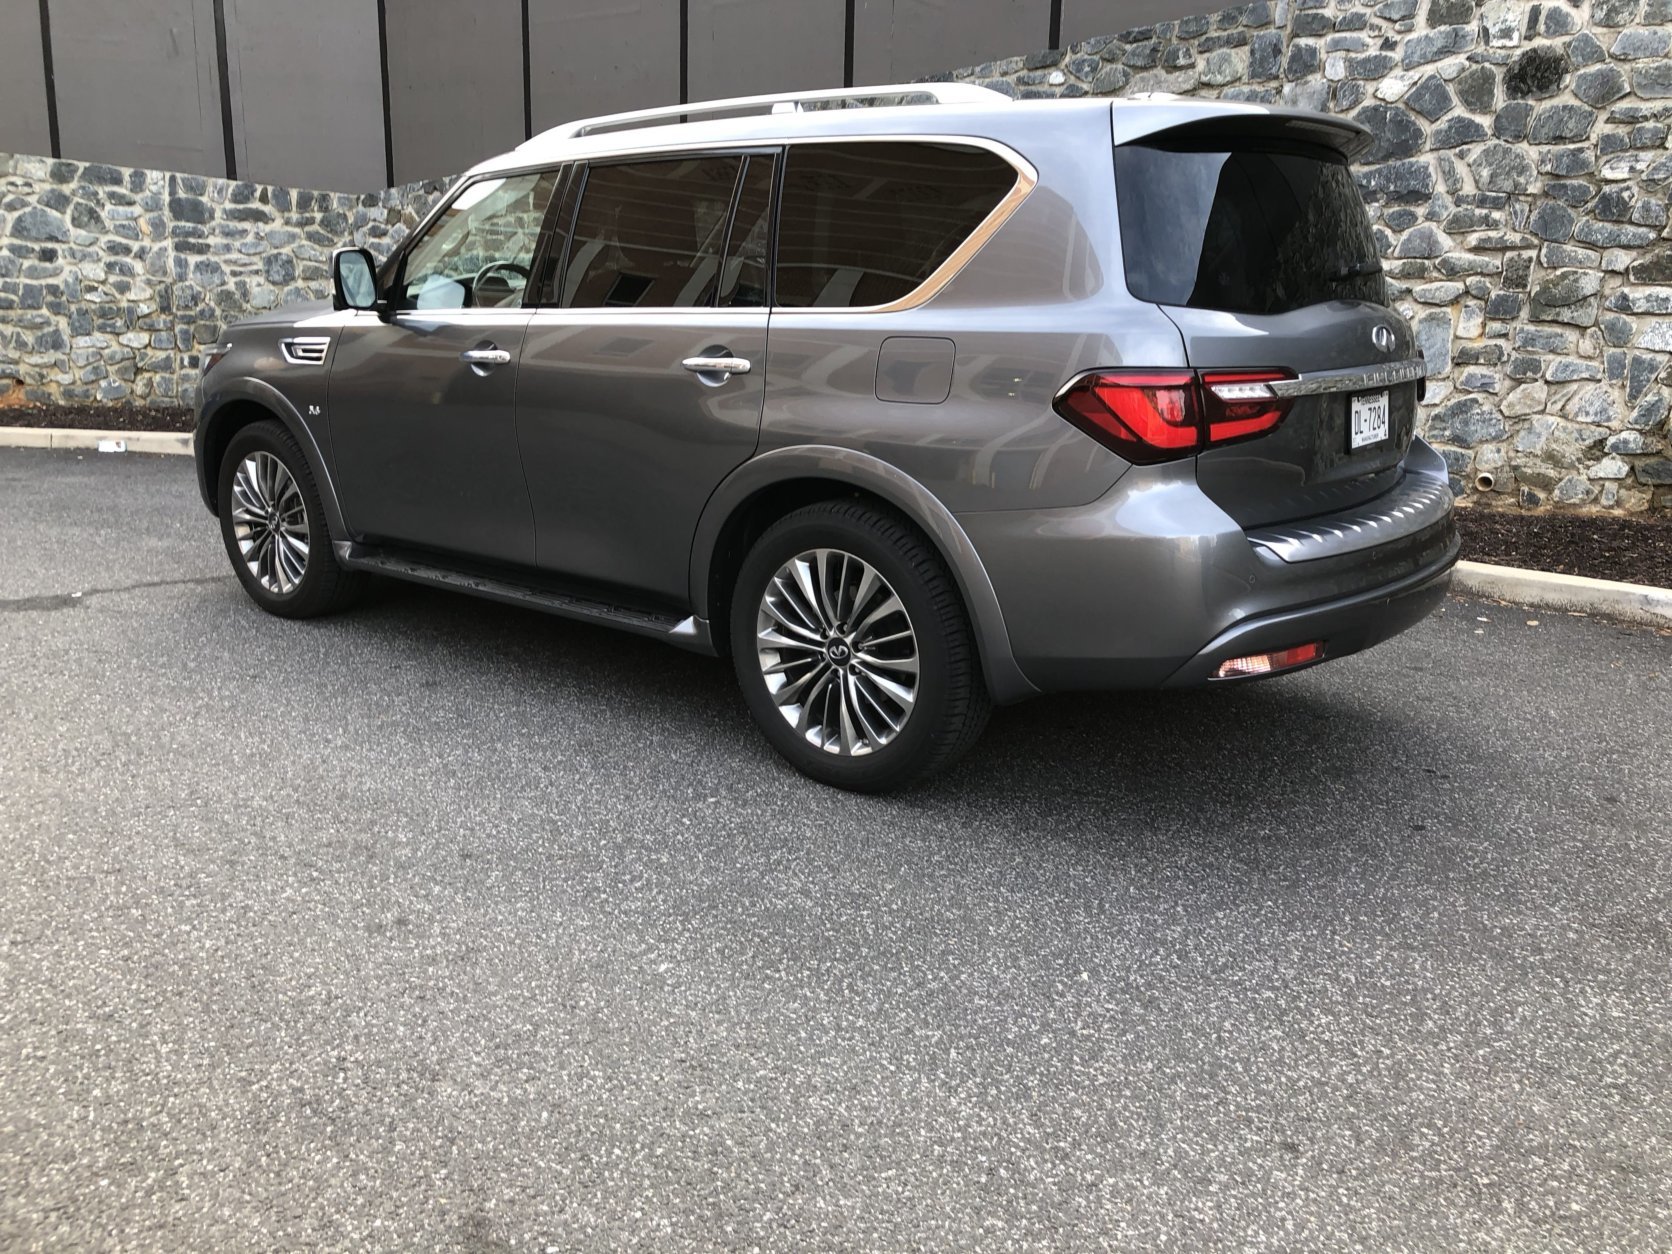 Thankfully, the tall QX80 comes with running boards to help entry and exit but power-folding running boards would be nice. (WTOP/Mike Parris)